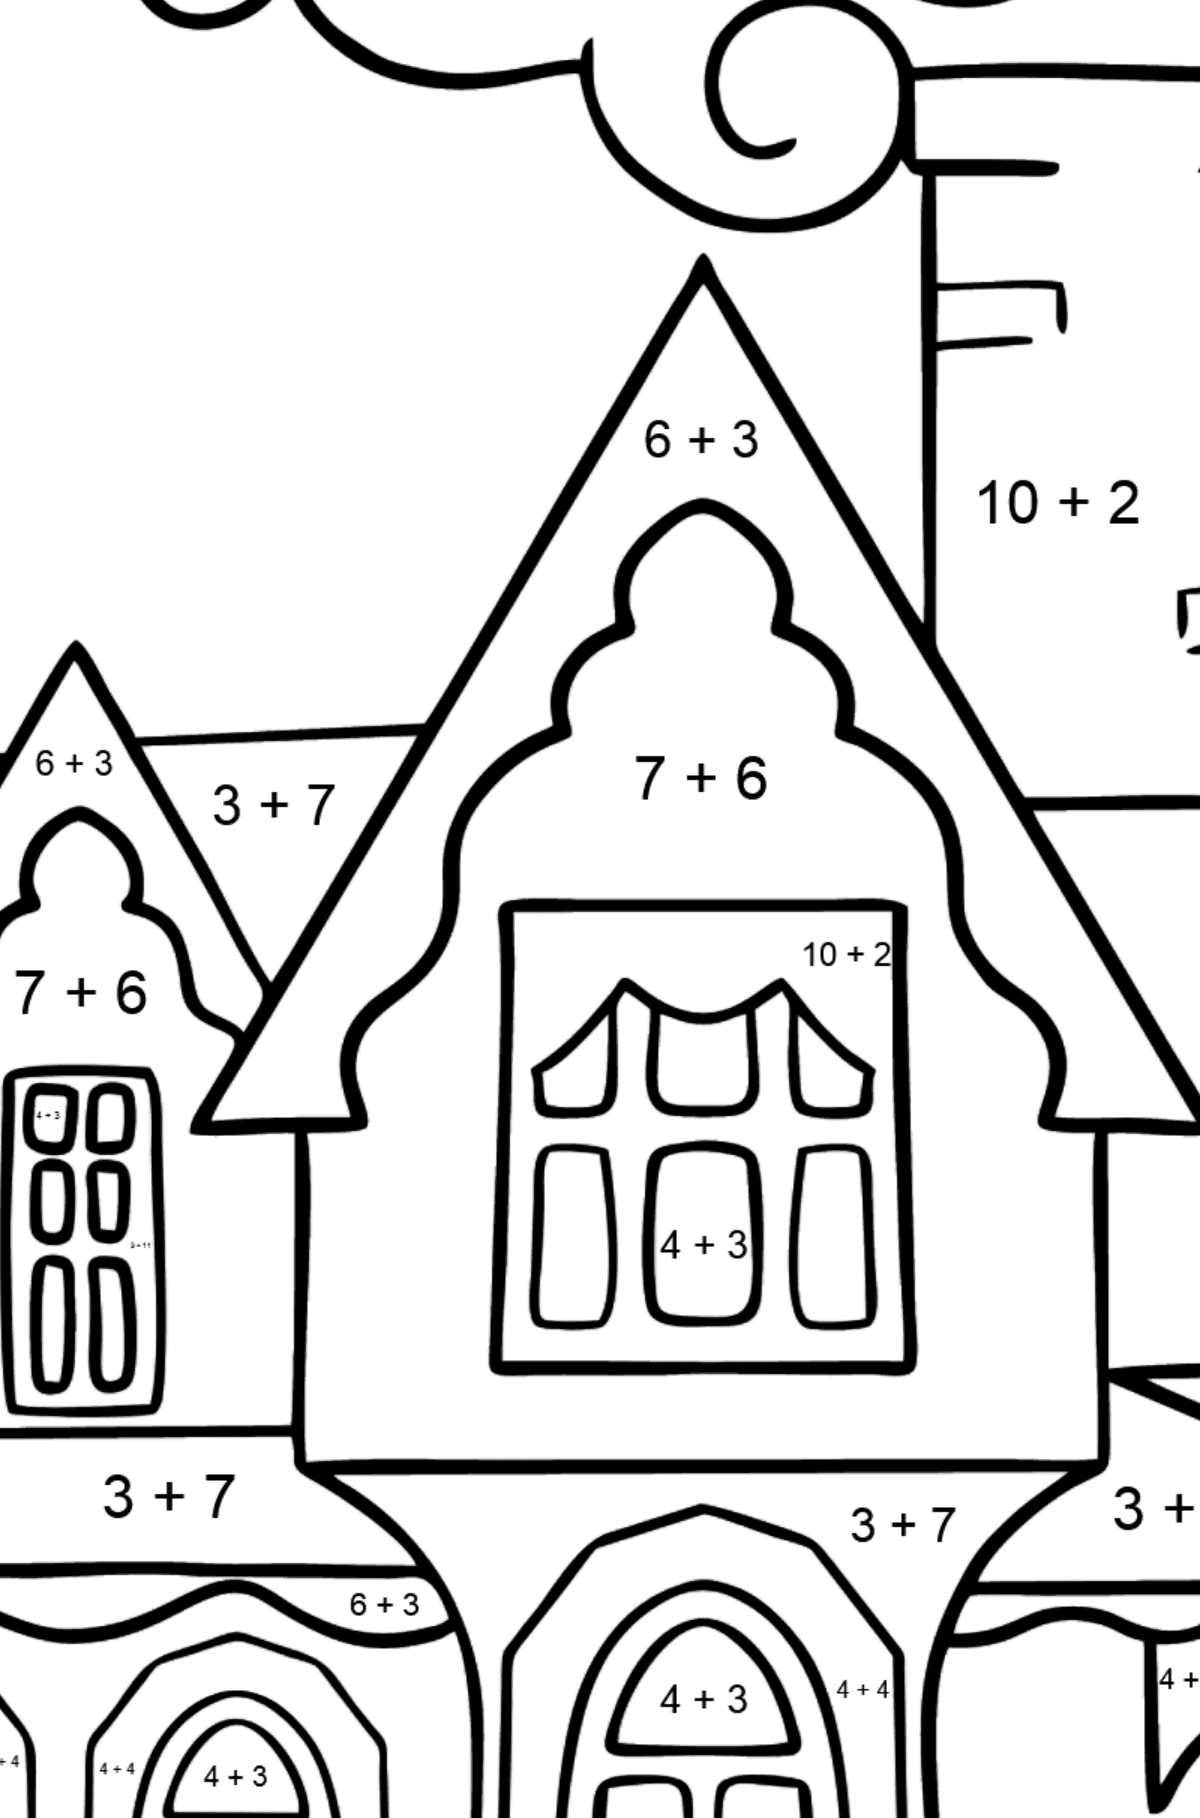 Coloring Page - A Miraculous House - Math Coloring - Addition for Kids